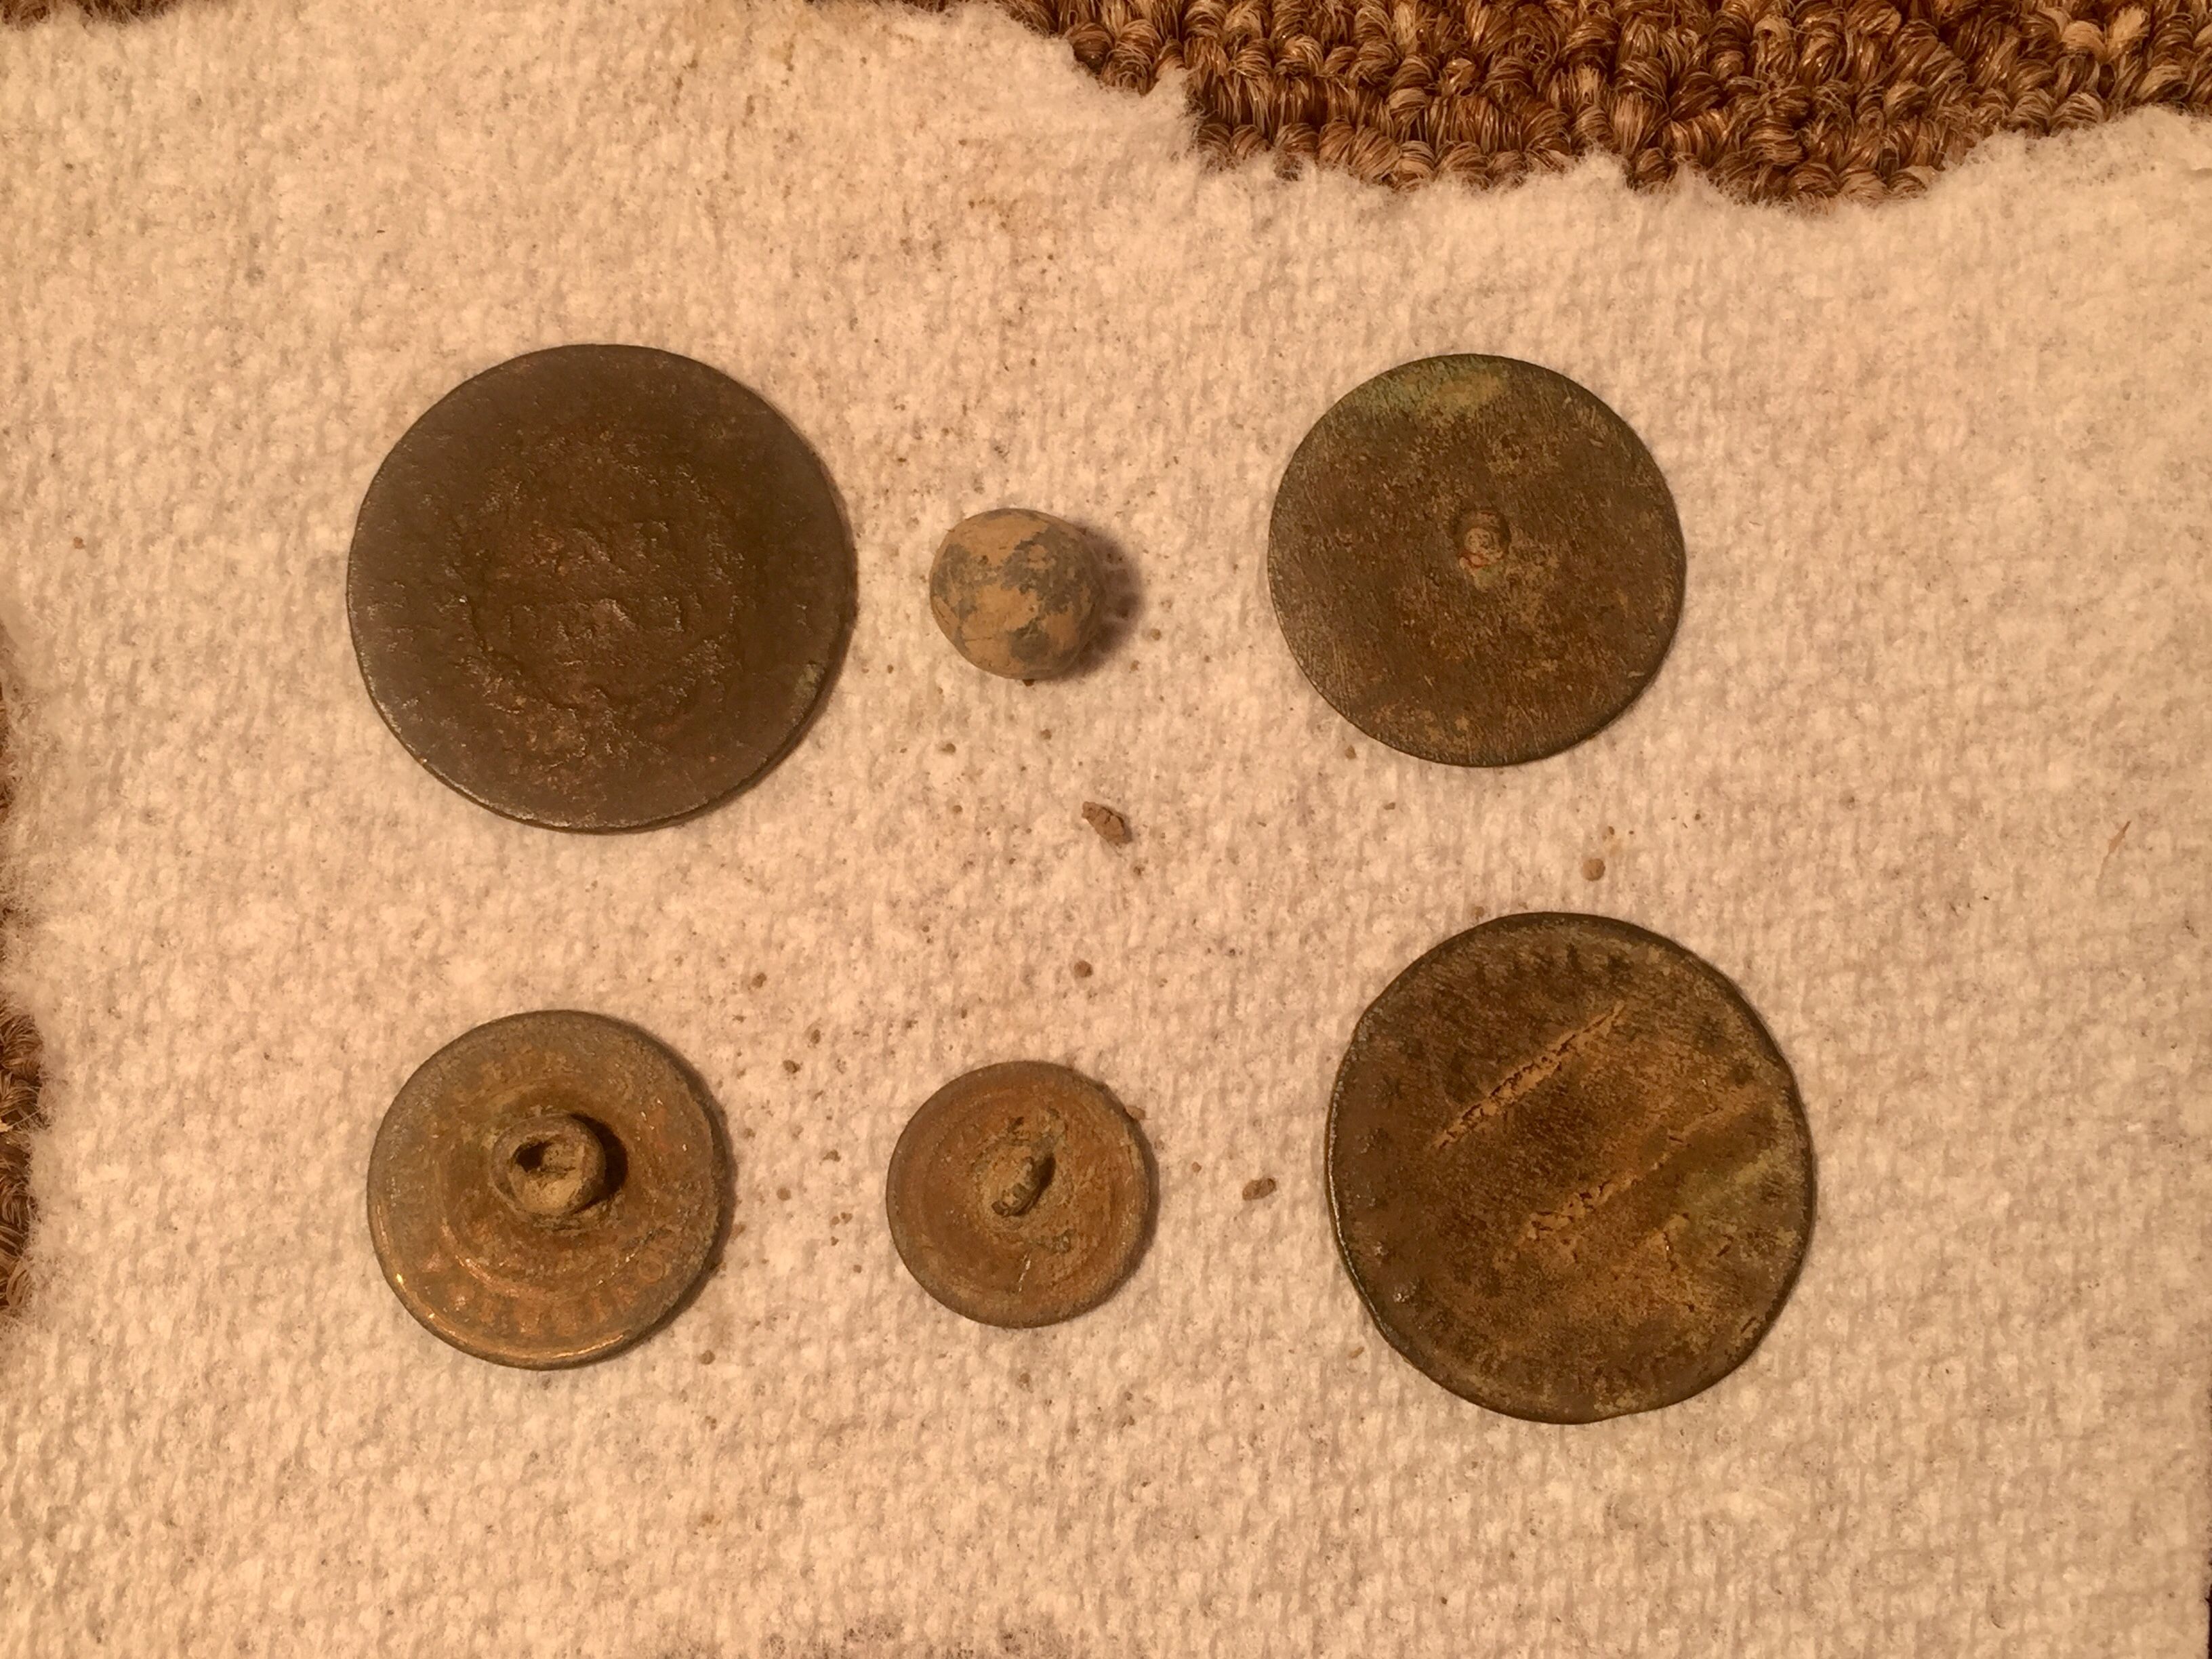 Finds for March 26. LC, 2 flatbuttons, Navy button, and 1837 Hard times "Millions for Defense" token